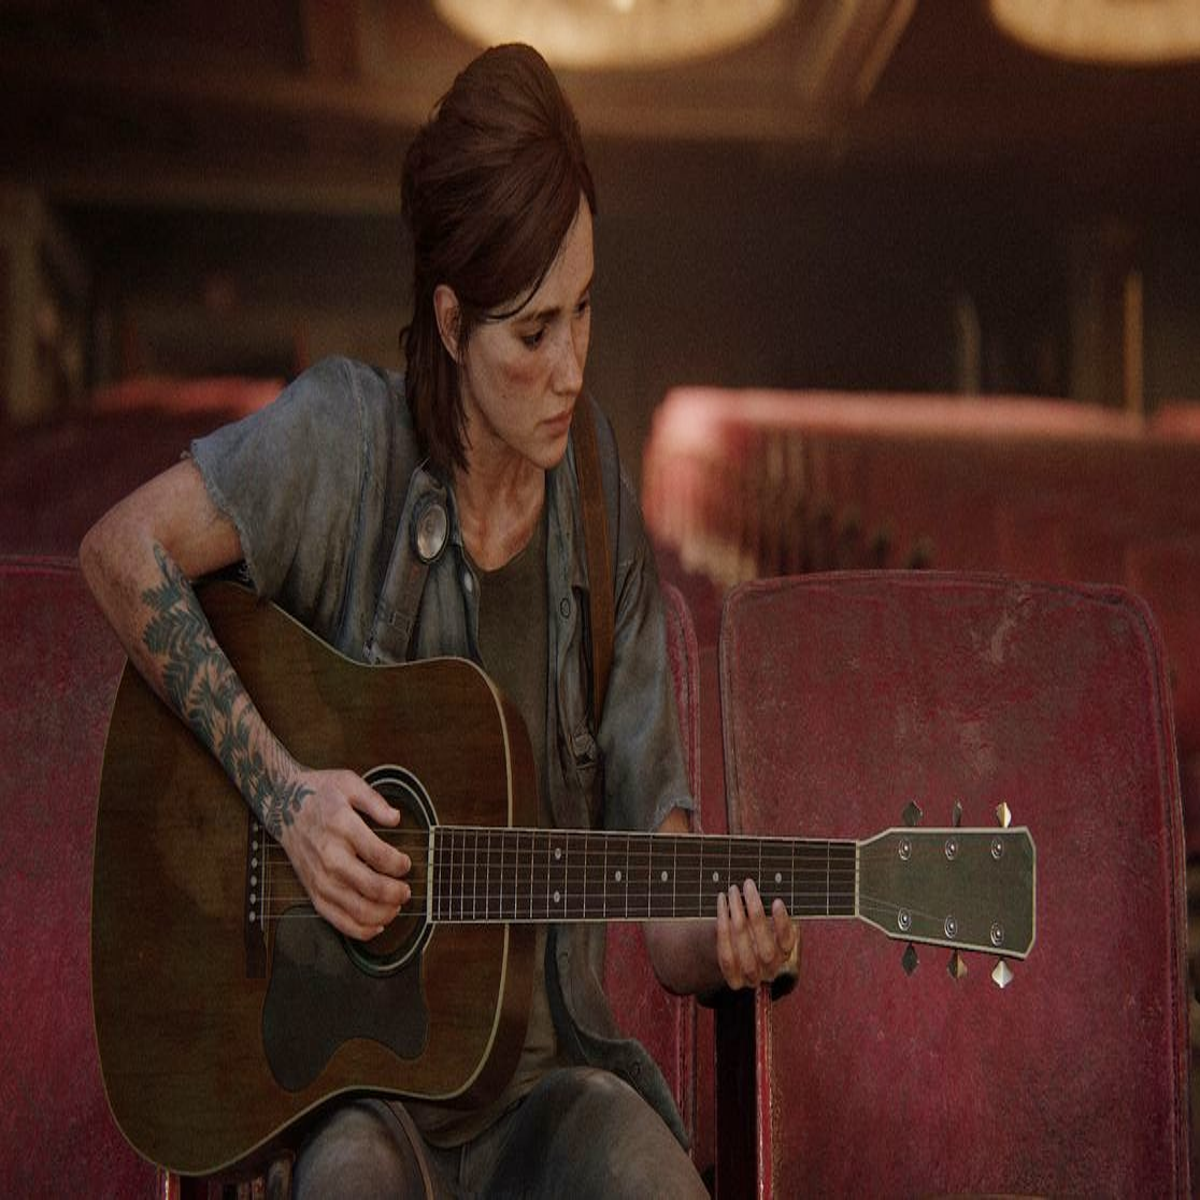 The Last of Us Part 2 on PC: all the rumors in one place